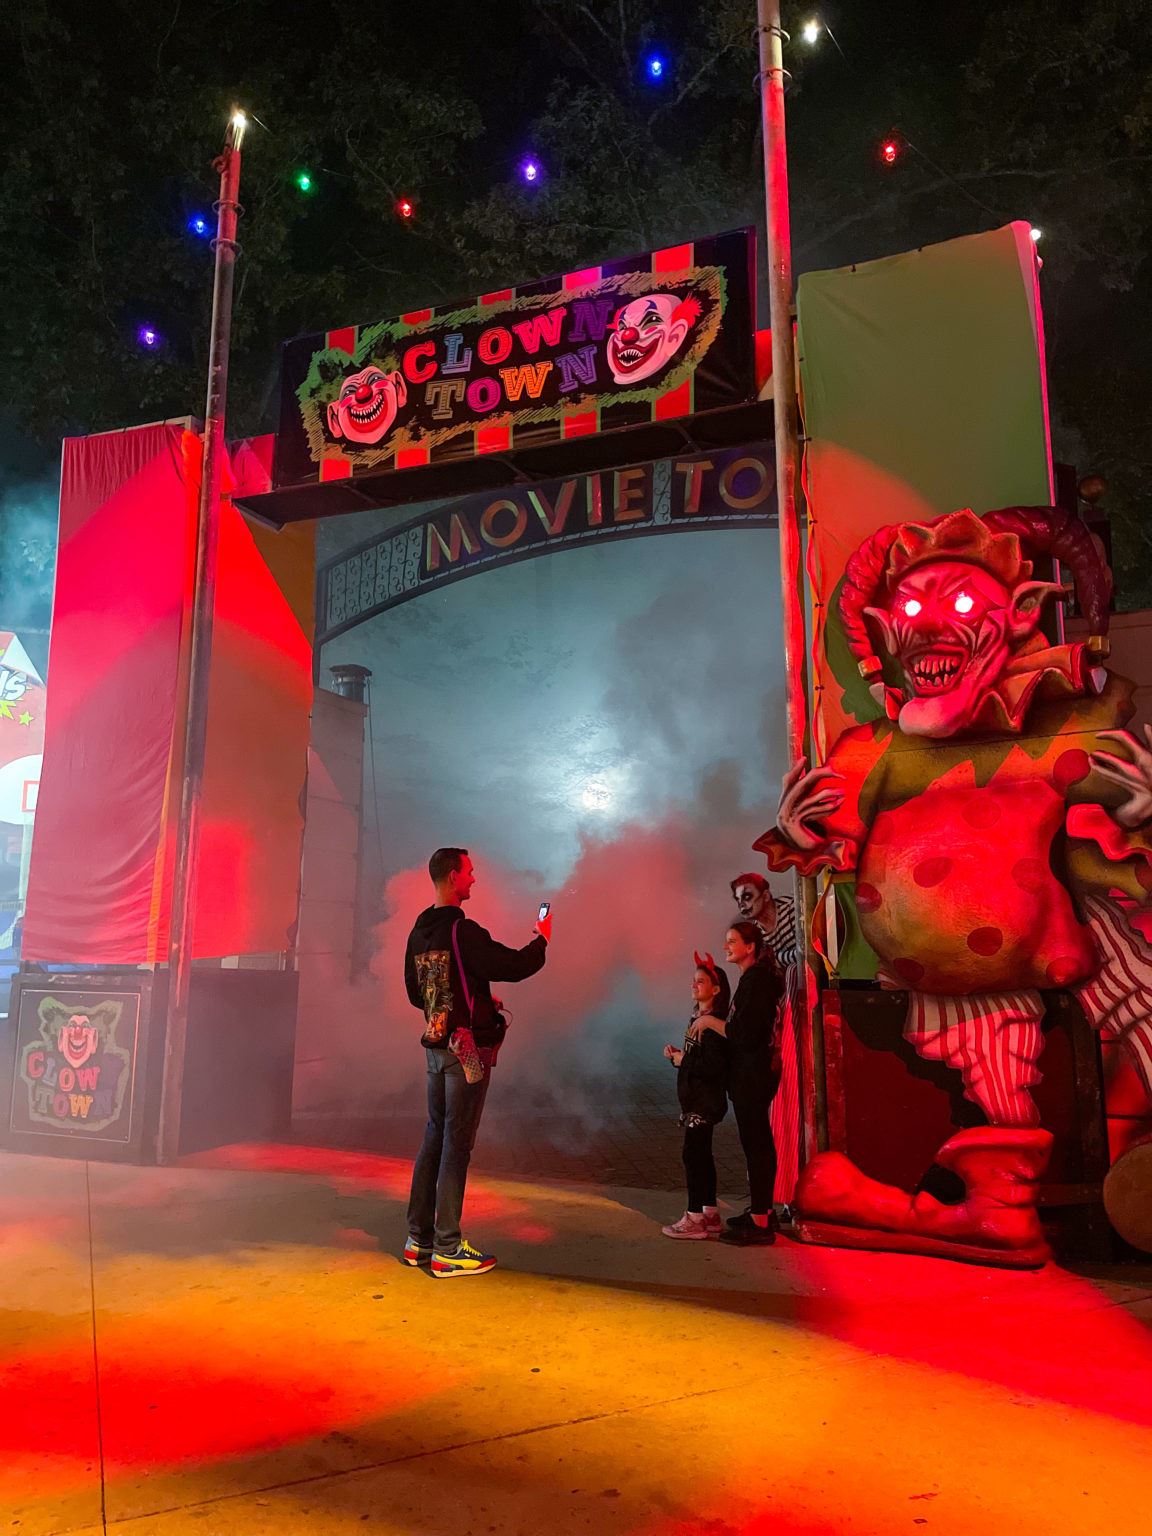 Six Flags Fright Fest is Back and Spookier Than Ever